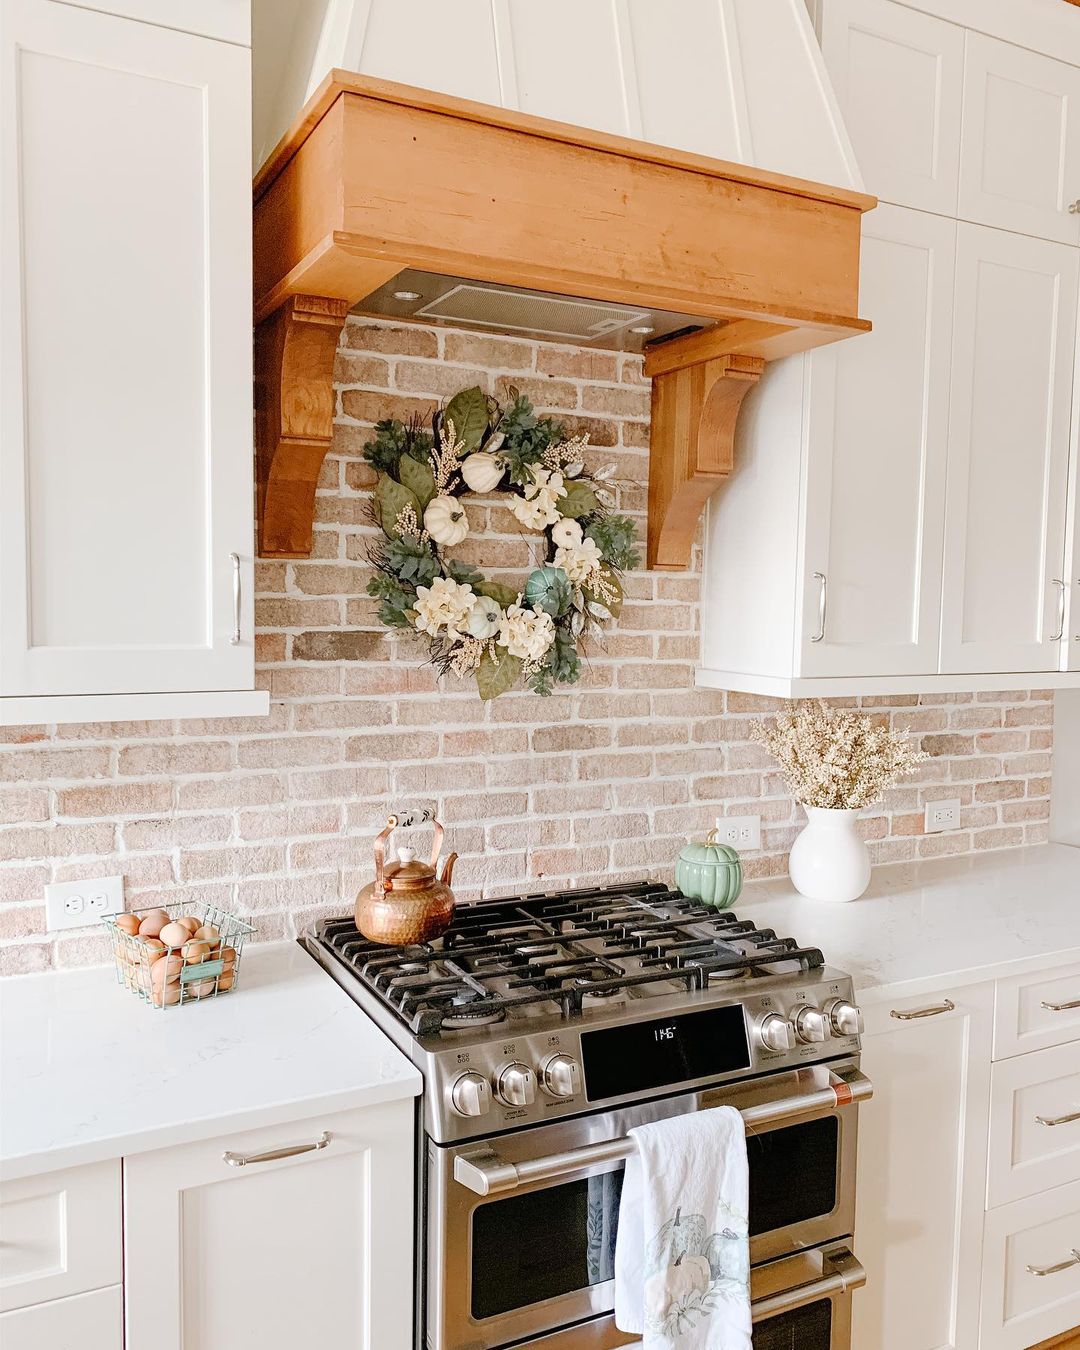 Gas stovetop in a white kitchen with brick backsplash. Photo by Instagram user @home_on_providence_hill